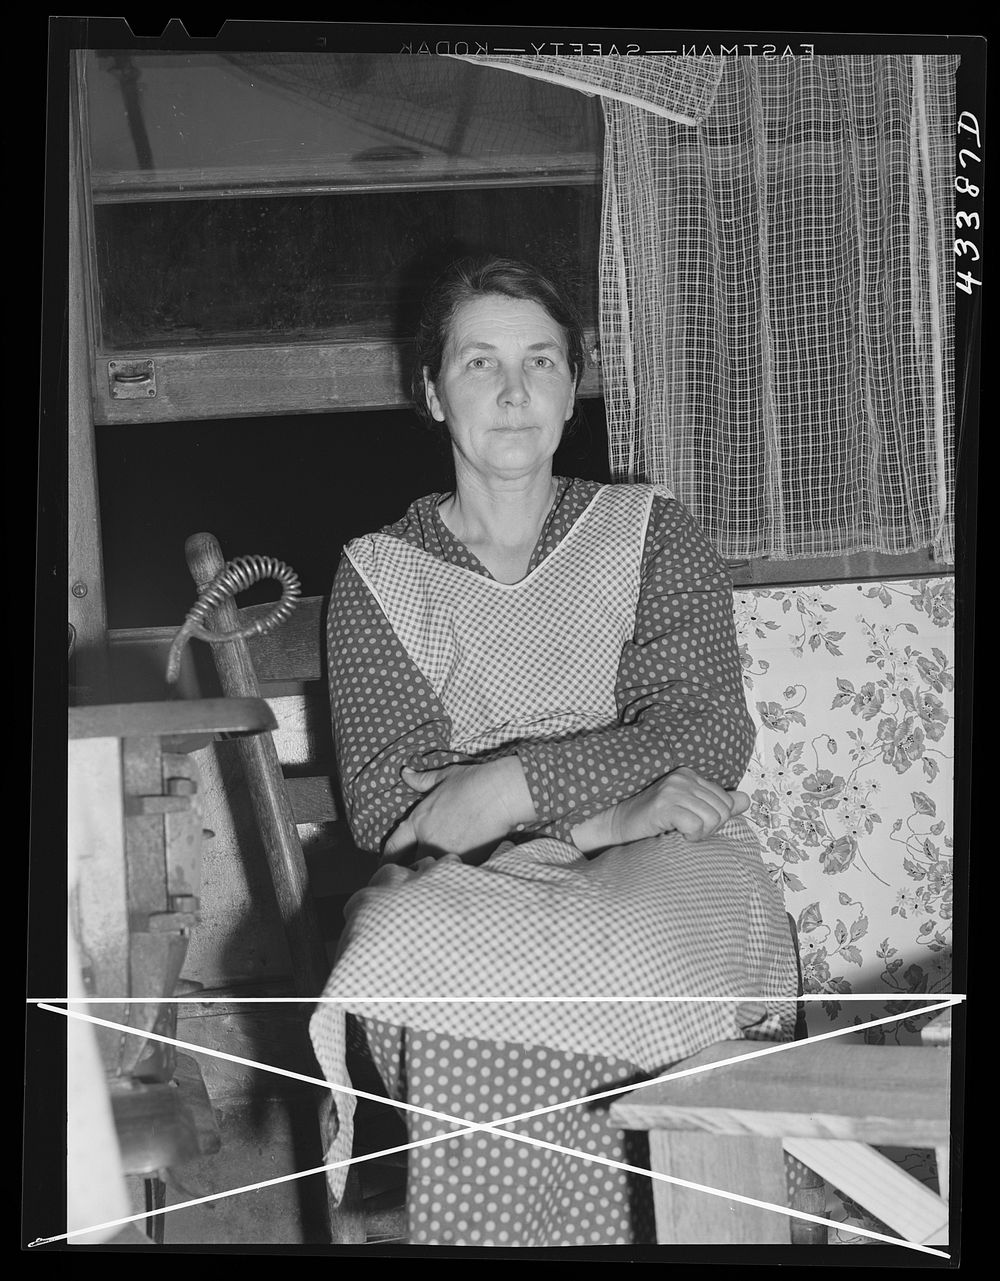 Wife of a construction worker. They live in a converted trolley car near Fort Bragg, North Carolina. Sourced from the…